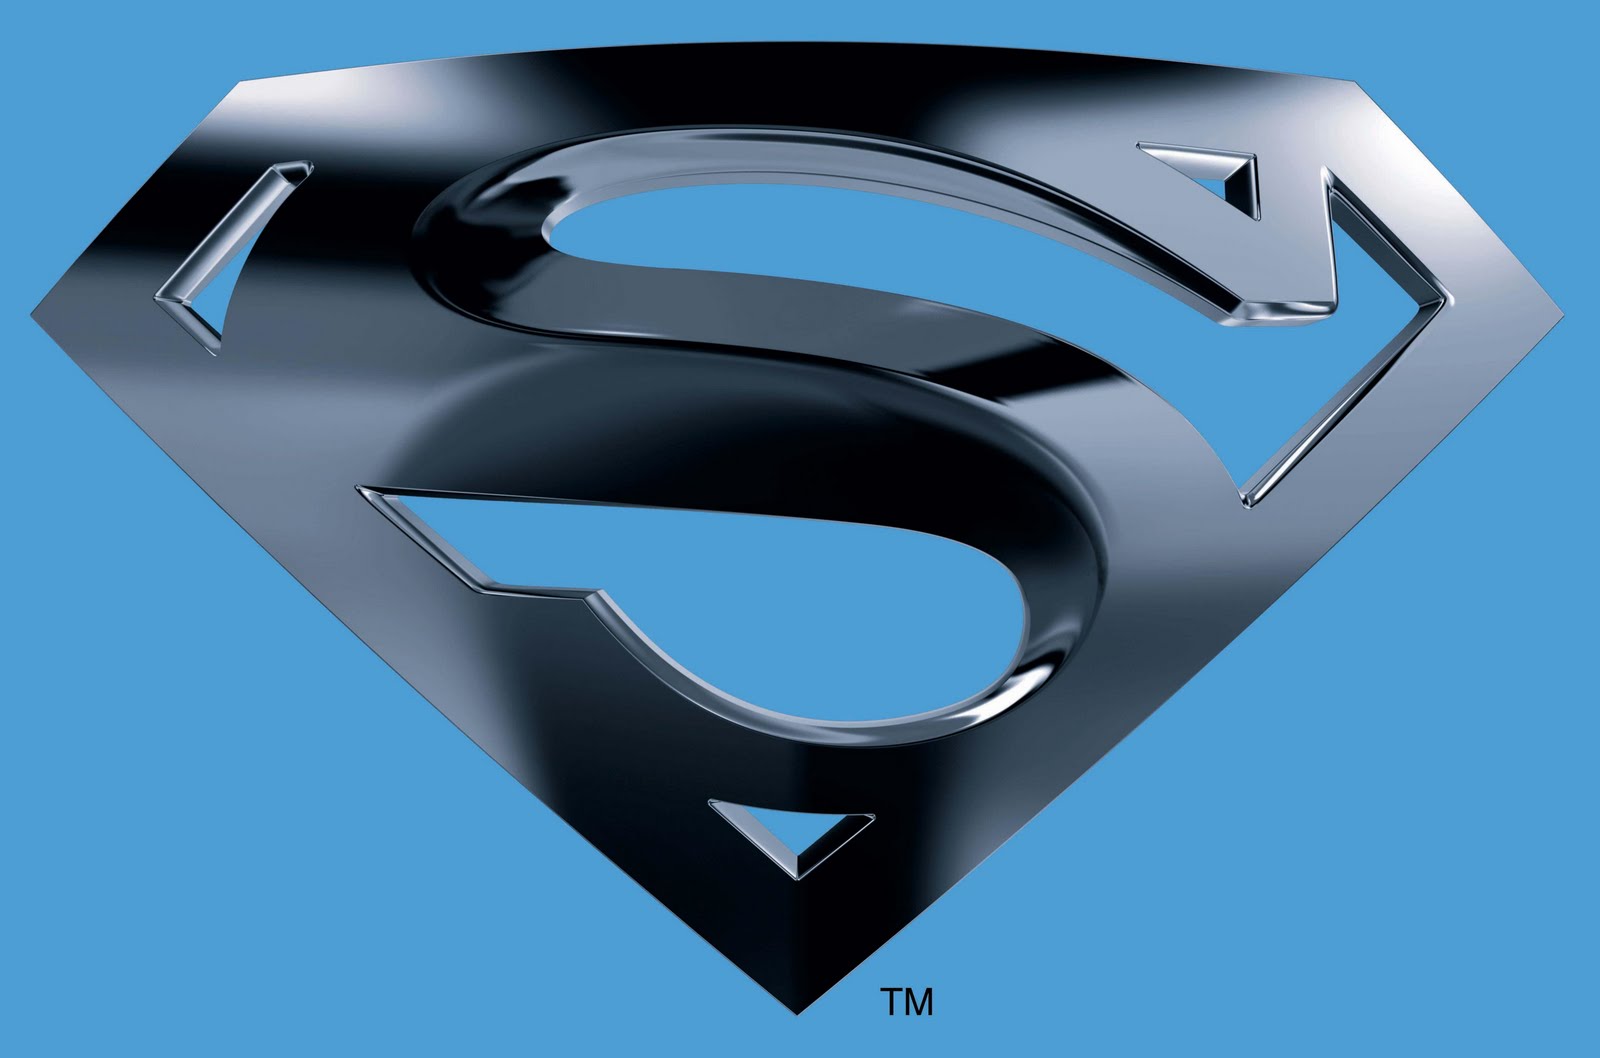  Box Superman S Logo HIgh Definition Wallpapers \ Backgrounds HD